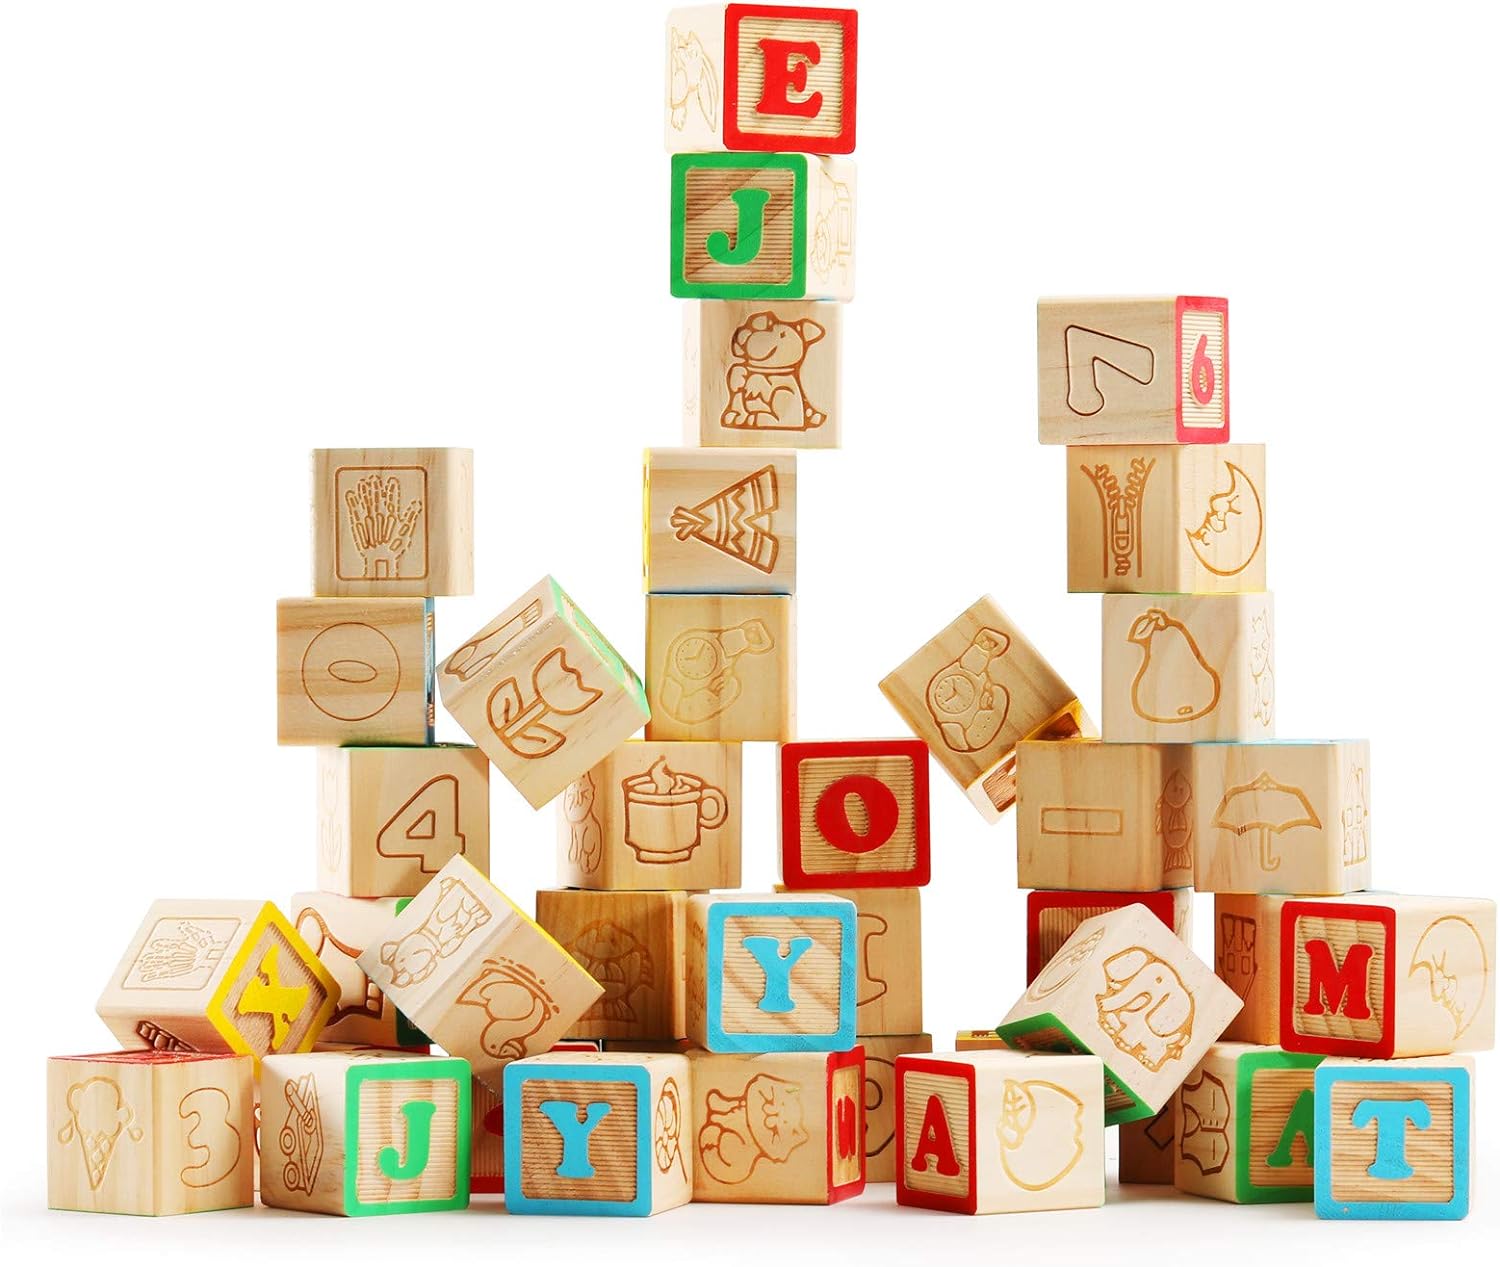 SainSmart Jr. Wooden ABC Alphabet Blocks Set, 40PCS Classic Wood Toy, for Preschool Letters Number Counting for Ages 3-6 Toddler